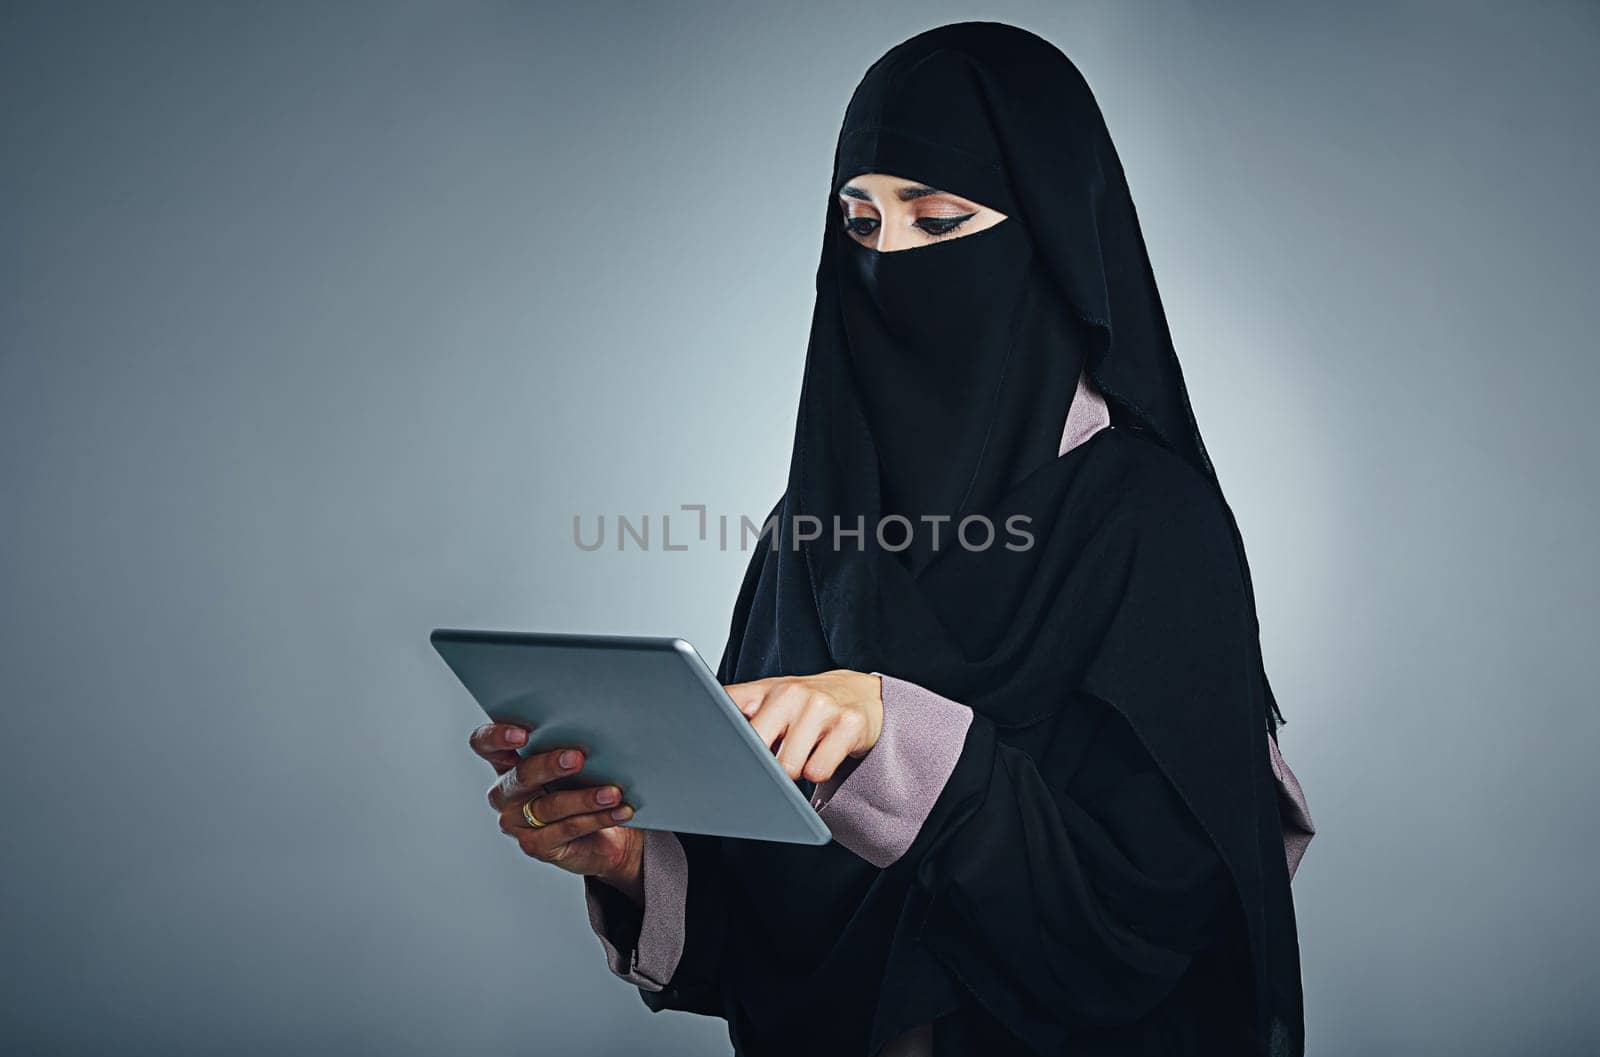 Doing so much with just one touch. Studio shot of a young woman wearing a burqa and using a digital tablet against a gray background. by YuriArcurs